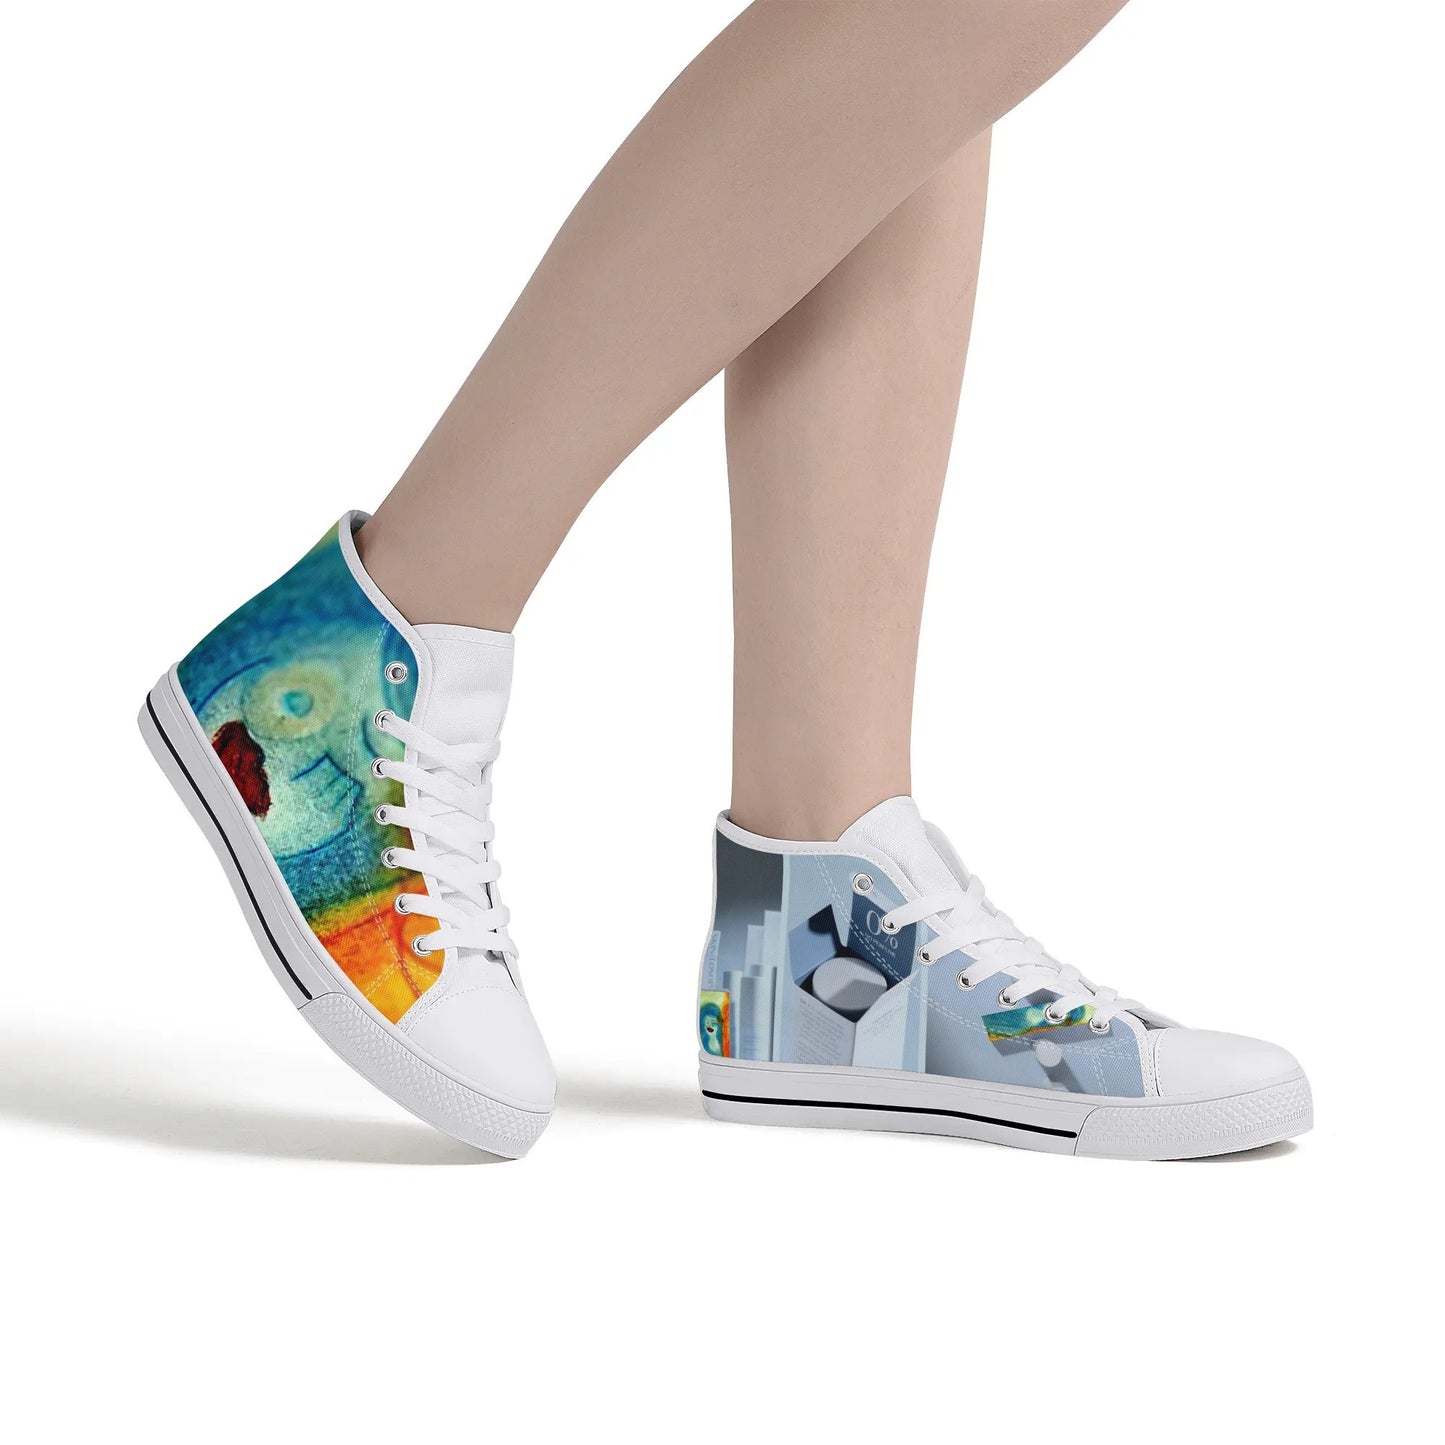 Let Me Design Your Company Canvas Sneakers